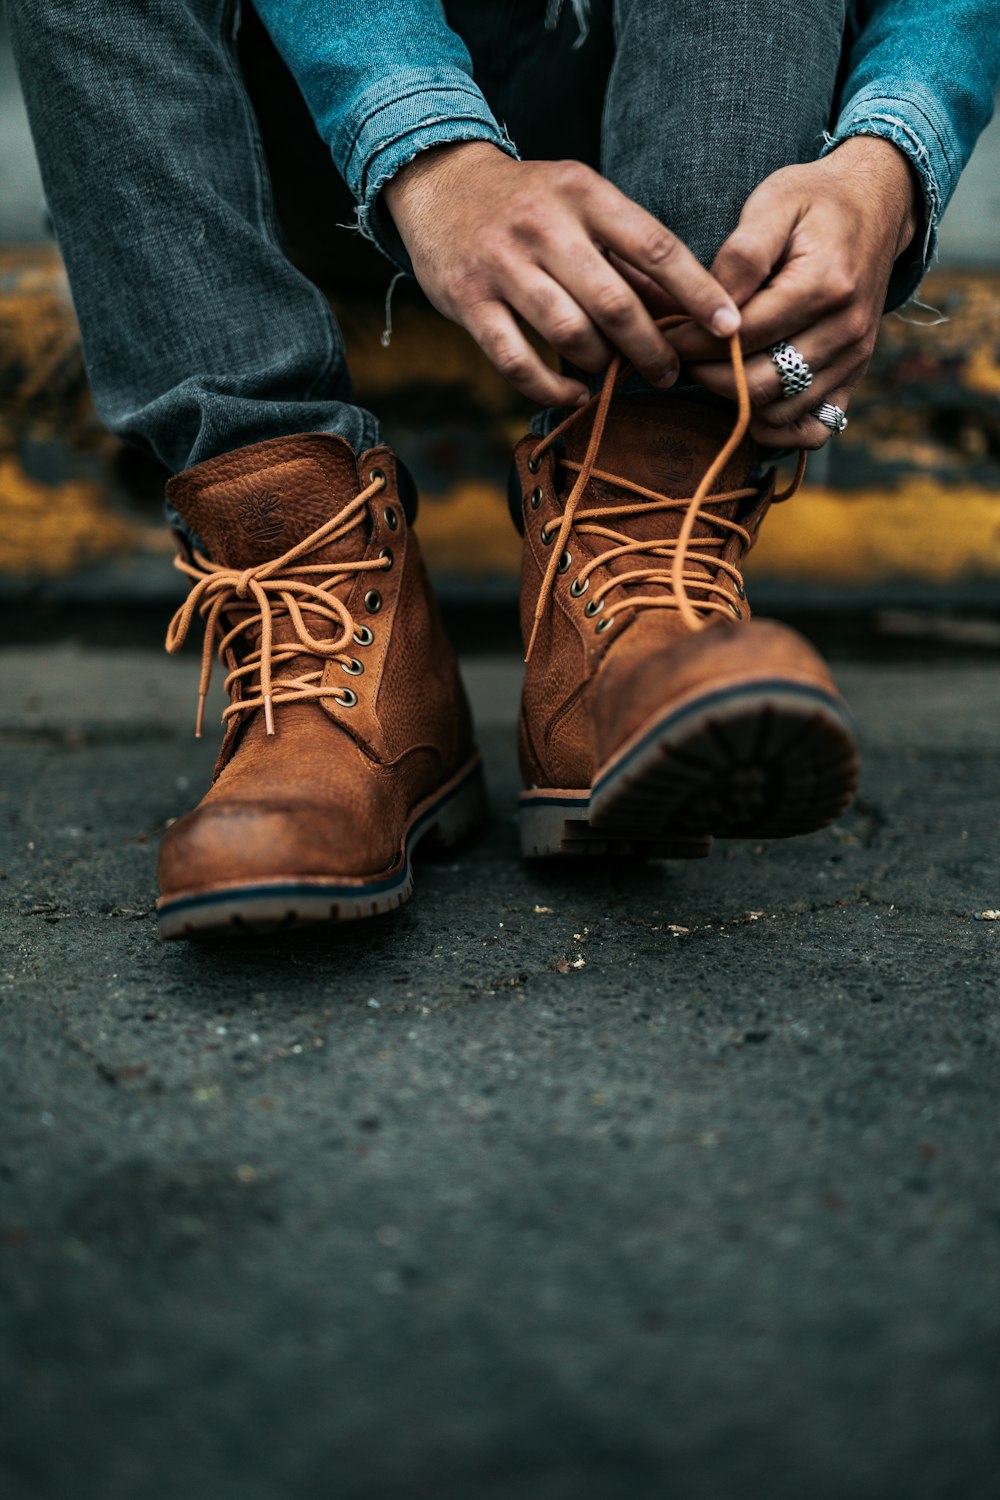 photography of person lacing his/her boots